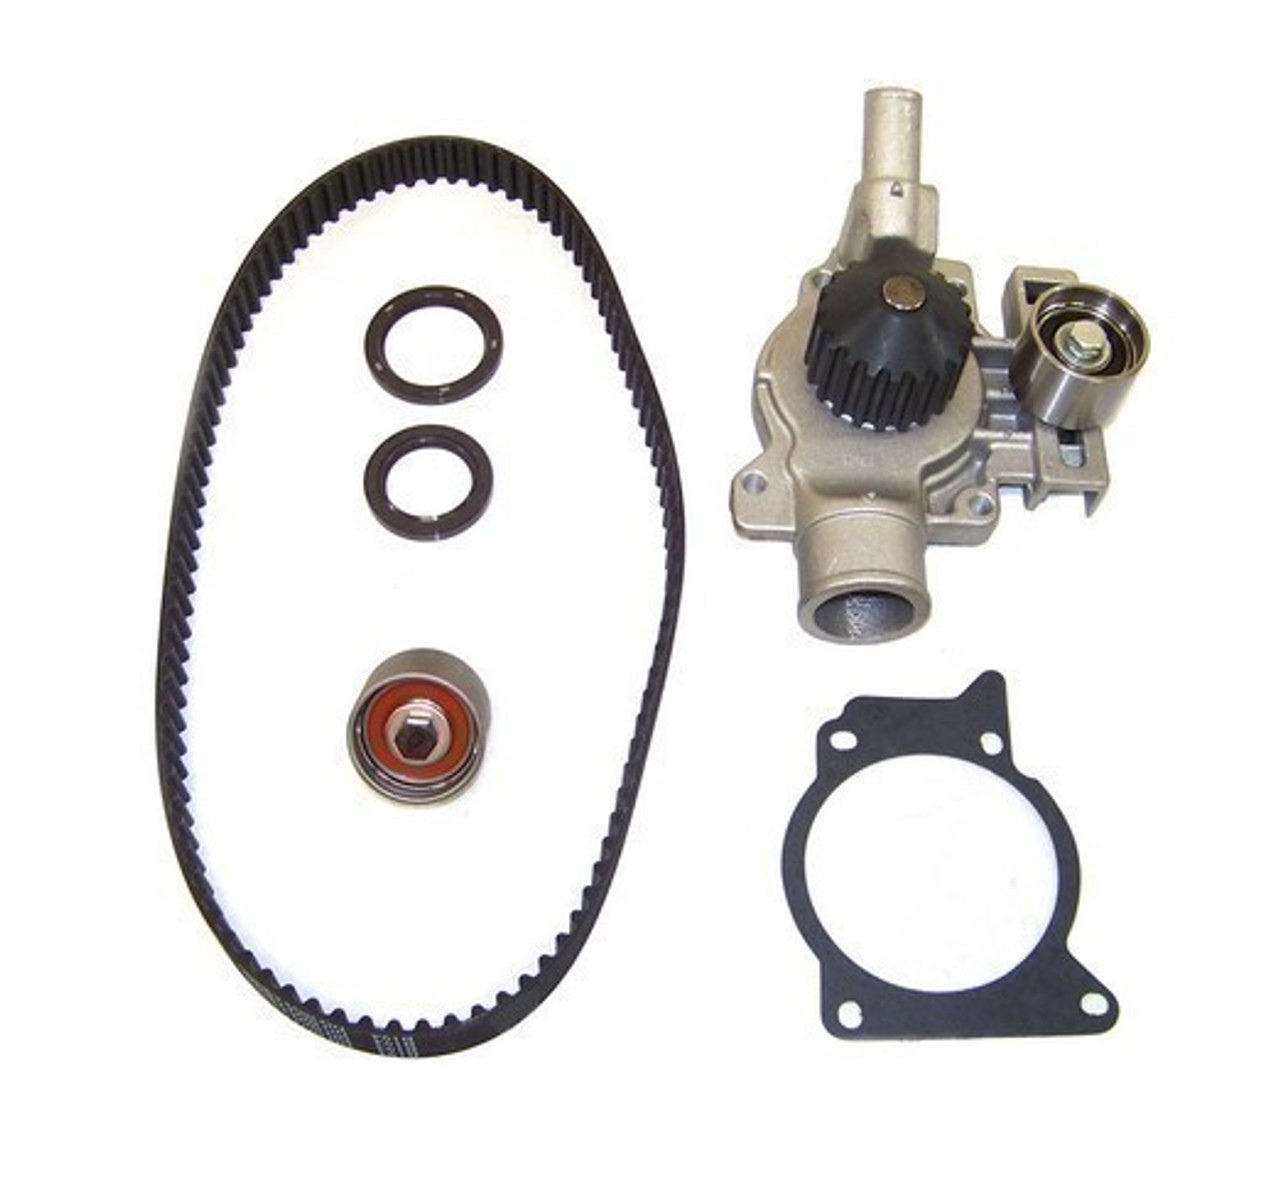 1994 Mercury Tracer 1.9L Engine Timing Belt Kit with Water Pump TBK4125WP -8